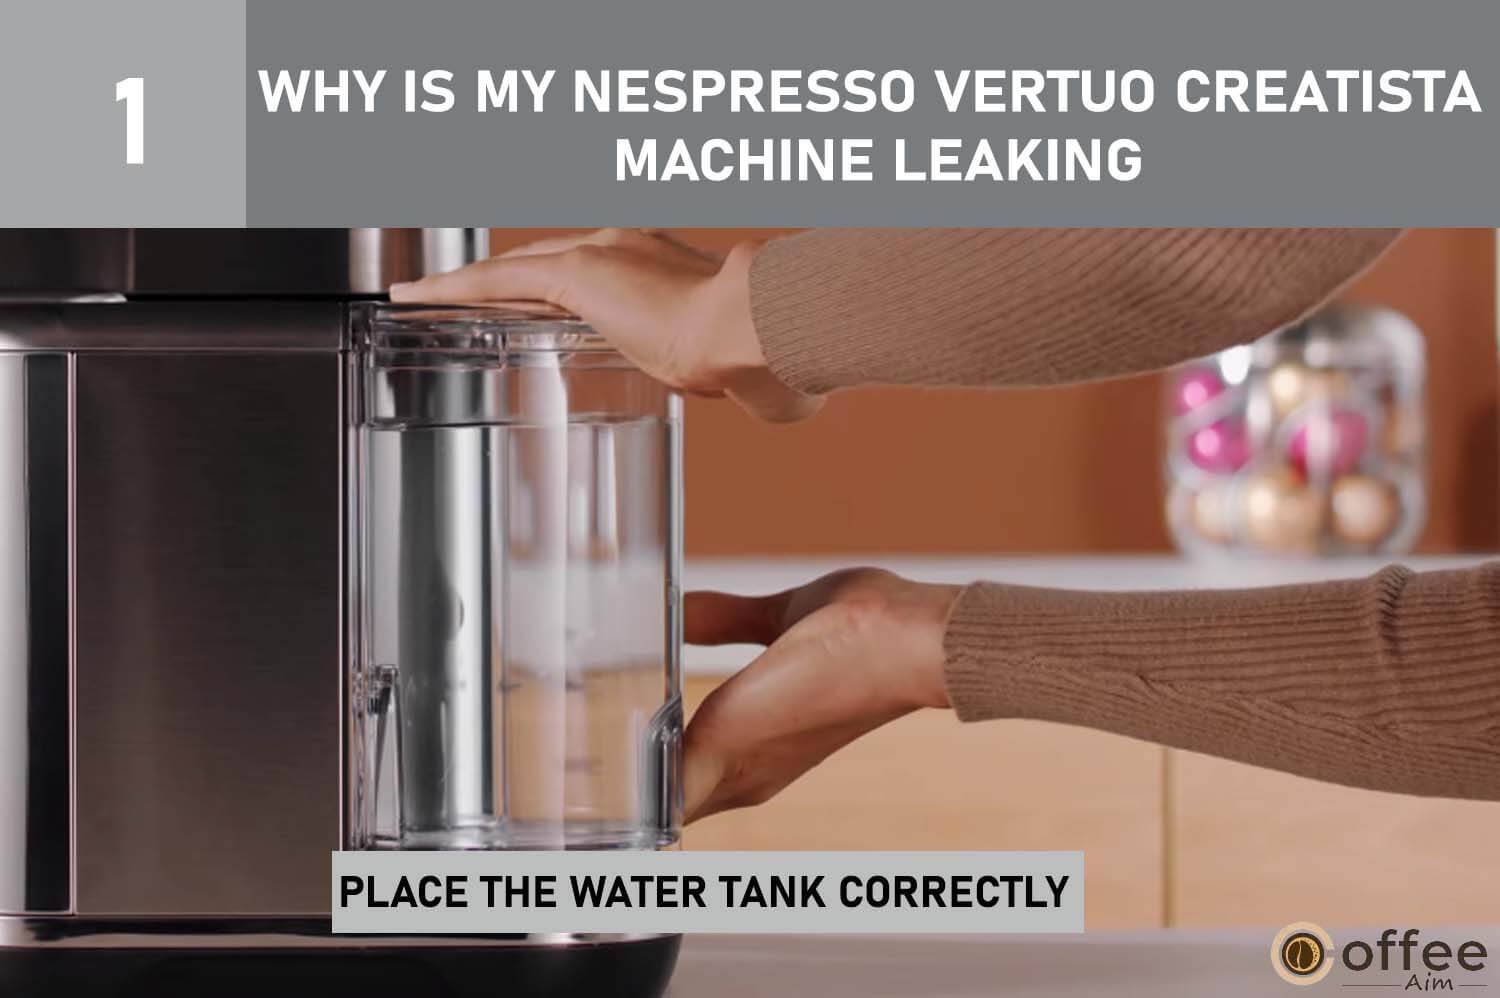 Position the water tank correctly in your Nespresso Vertuo Creatista to prevent leaks. Follow these steps for effective troubleshooting.